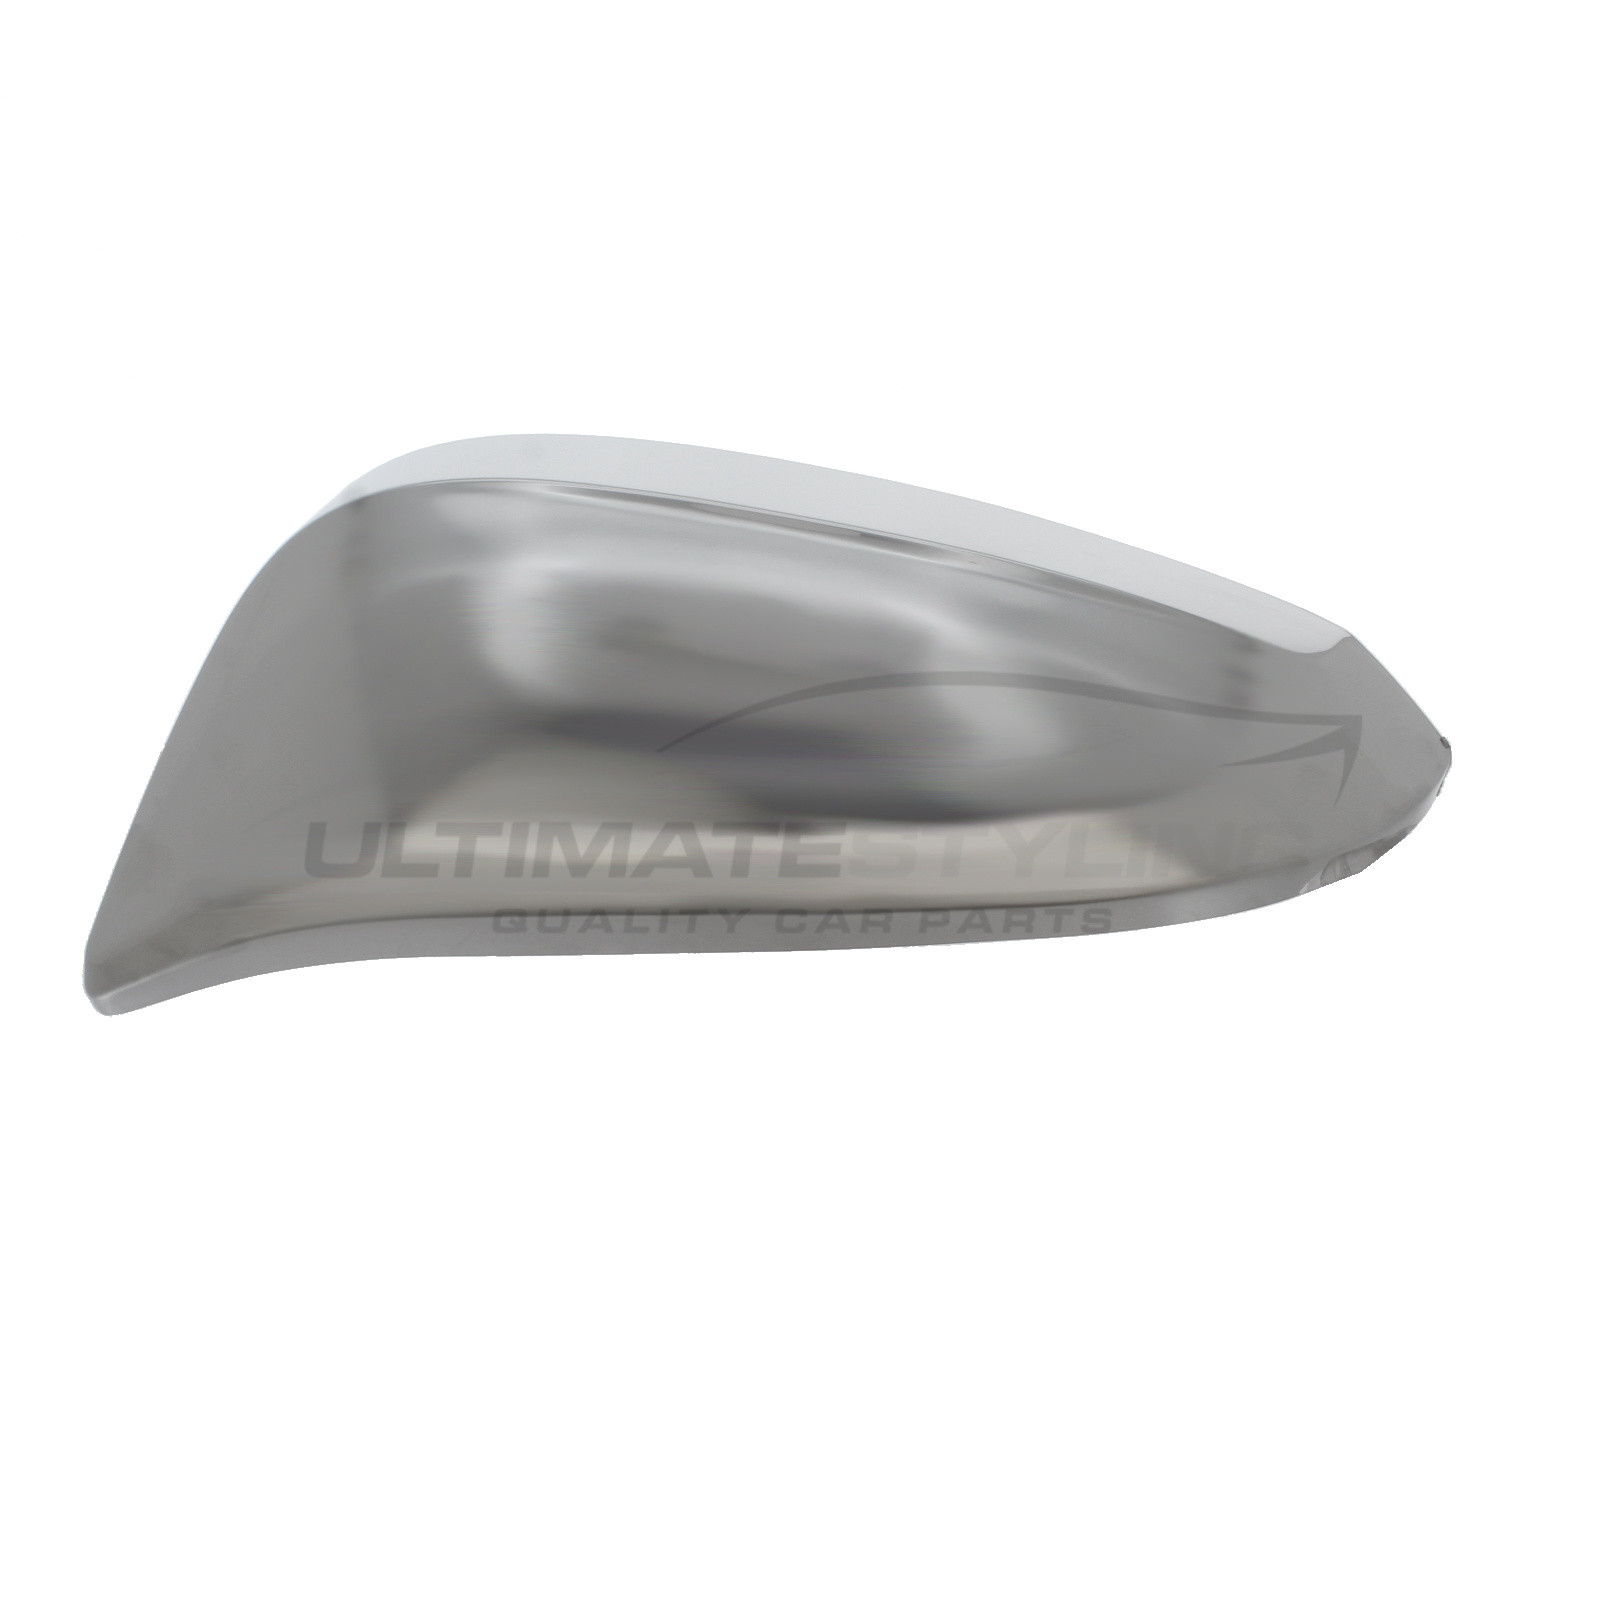 Toyota Hi-Lux 2016-> Wing Mirror Cover Cap Casing Chrome Finish Passenger Side (LH)